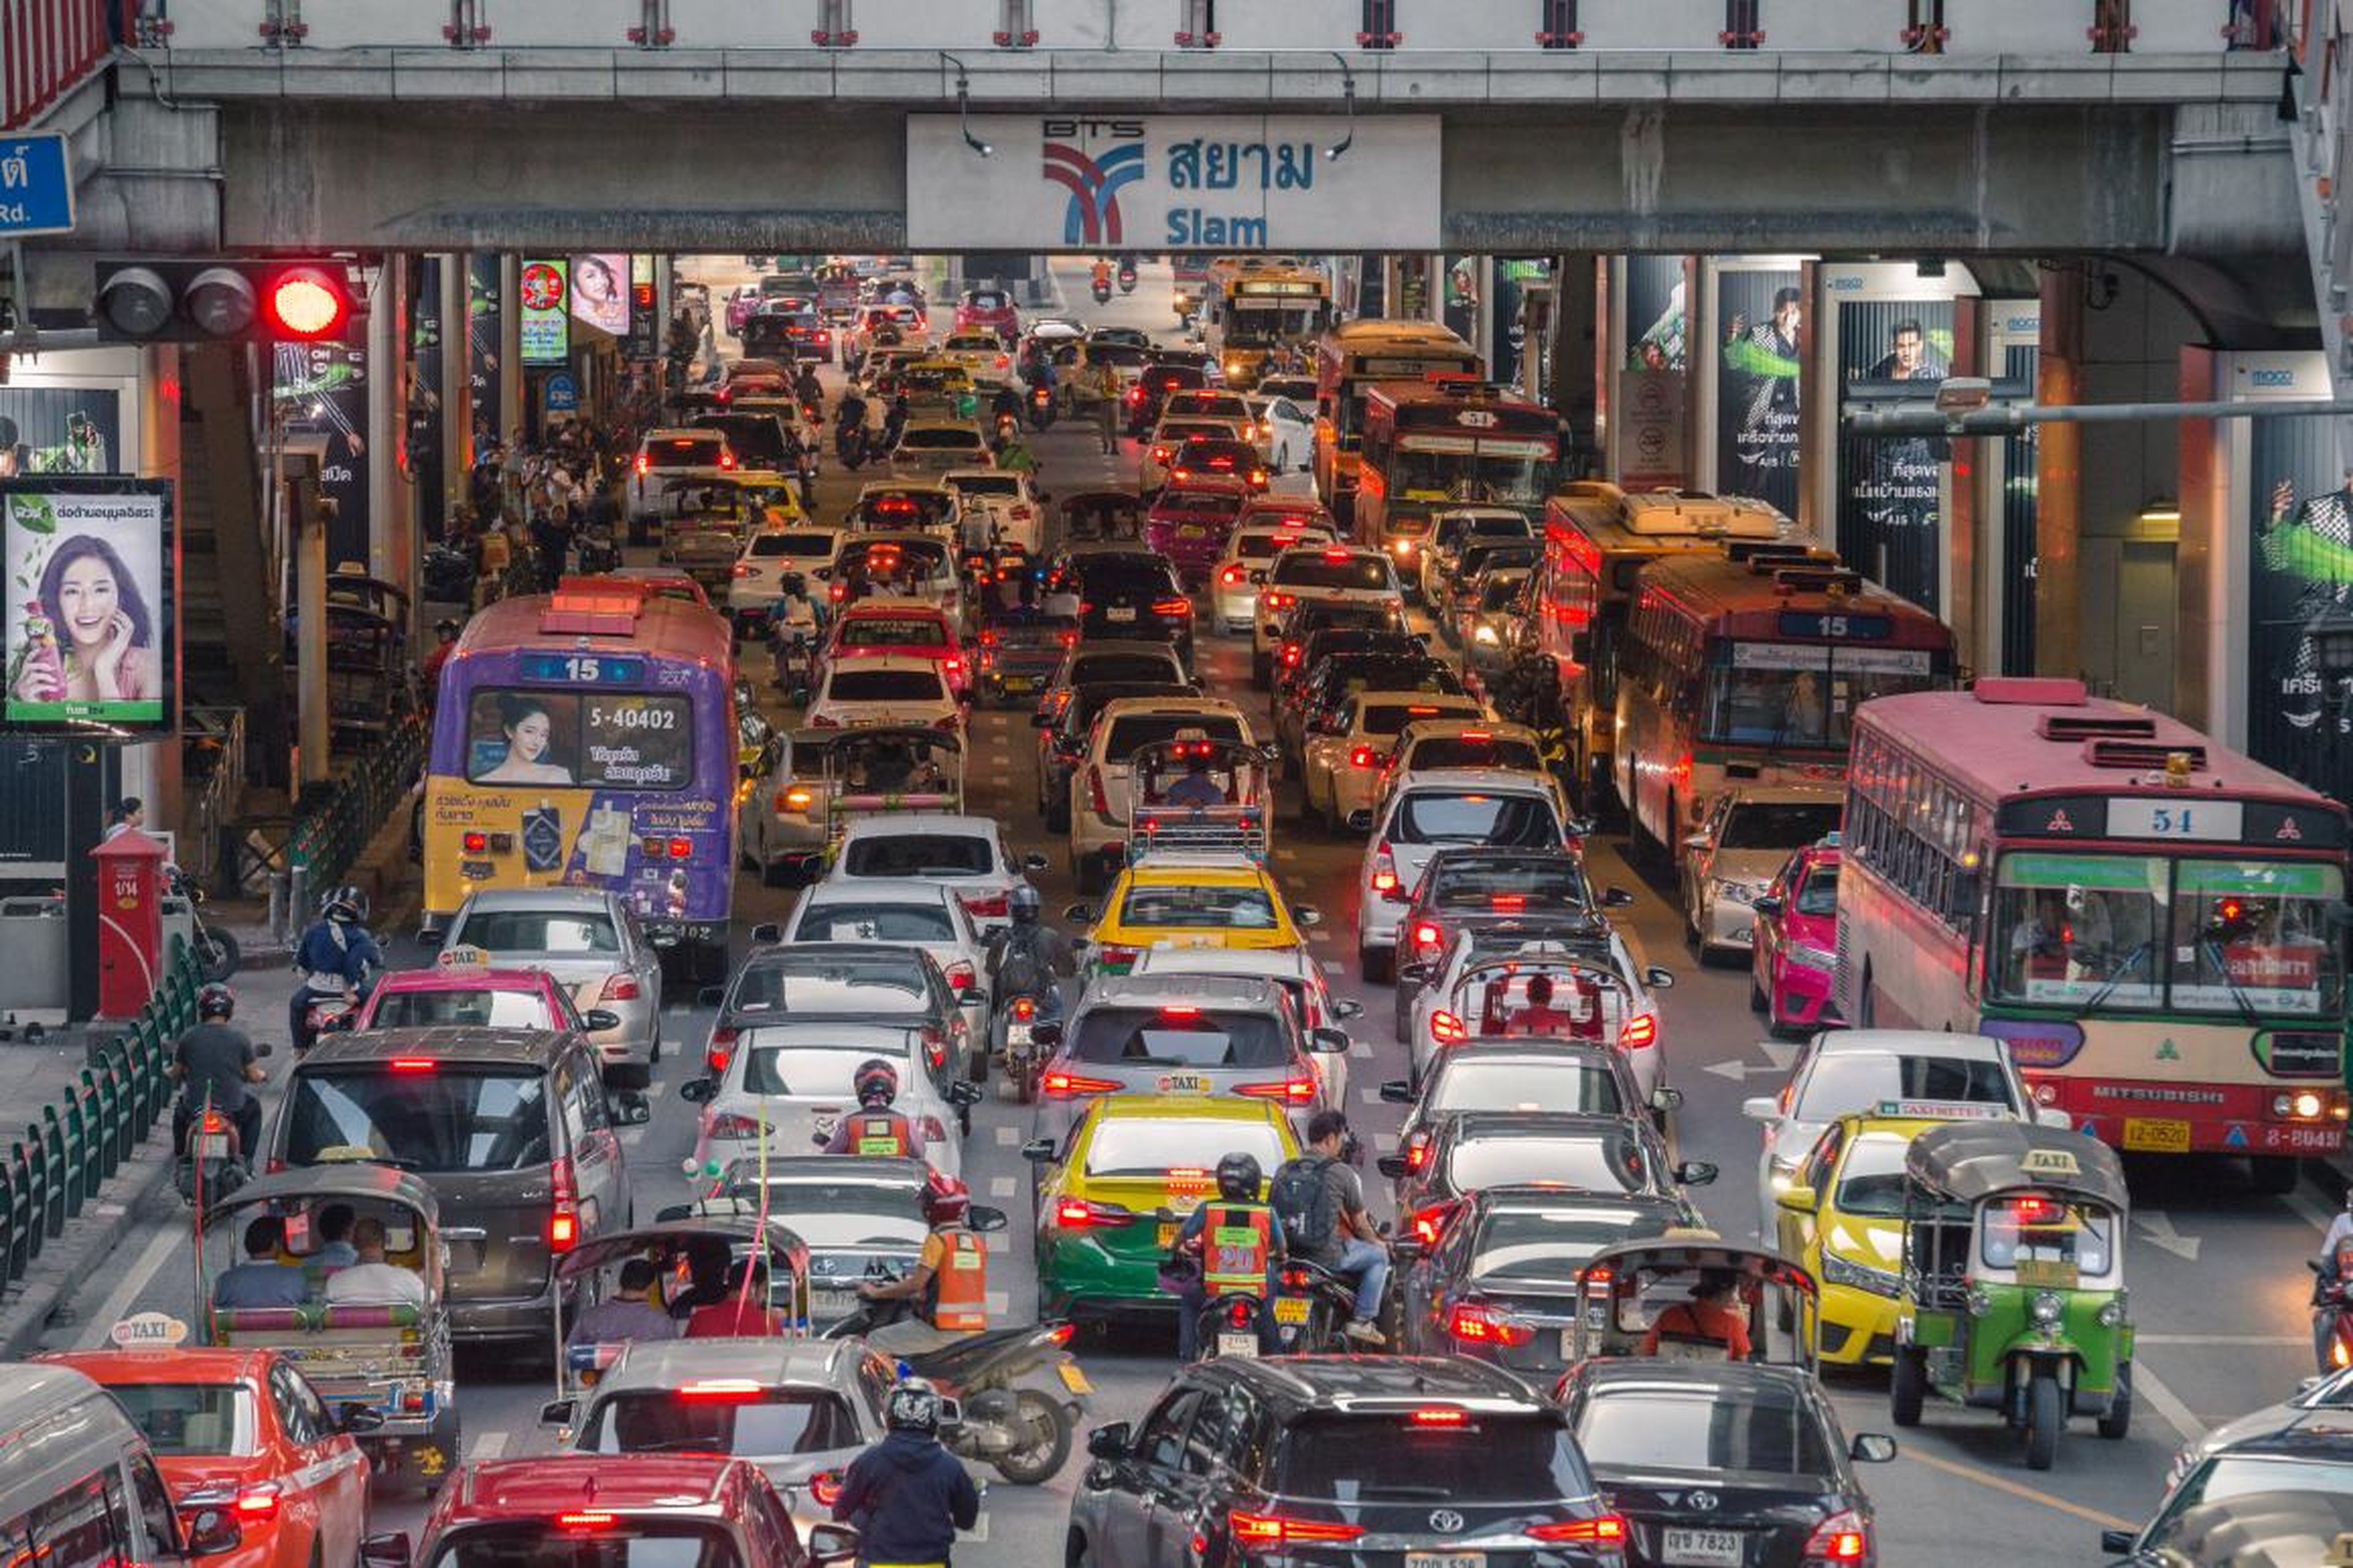 According to INRIX, drivers in Bangkok spend an average of 64 hours a year stuck in traffic.